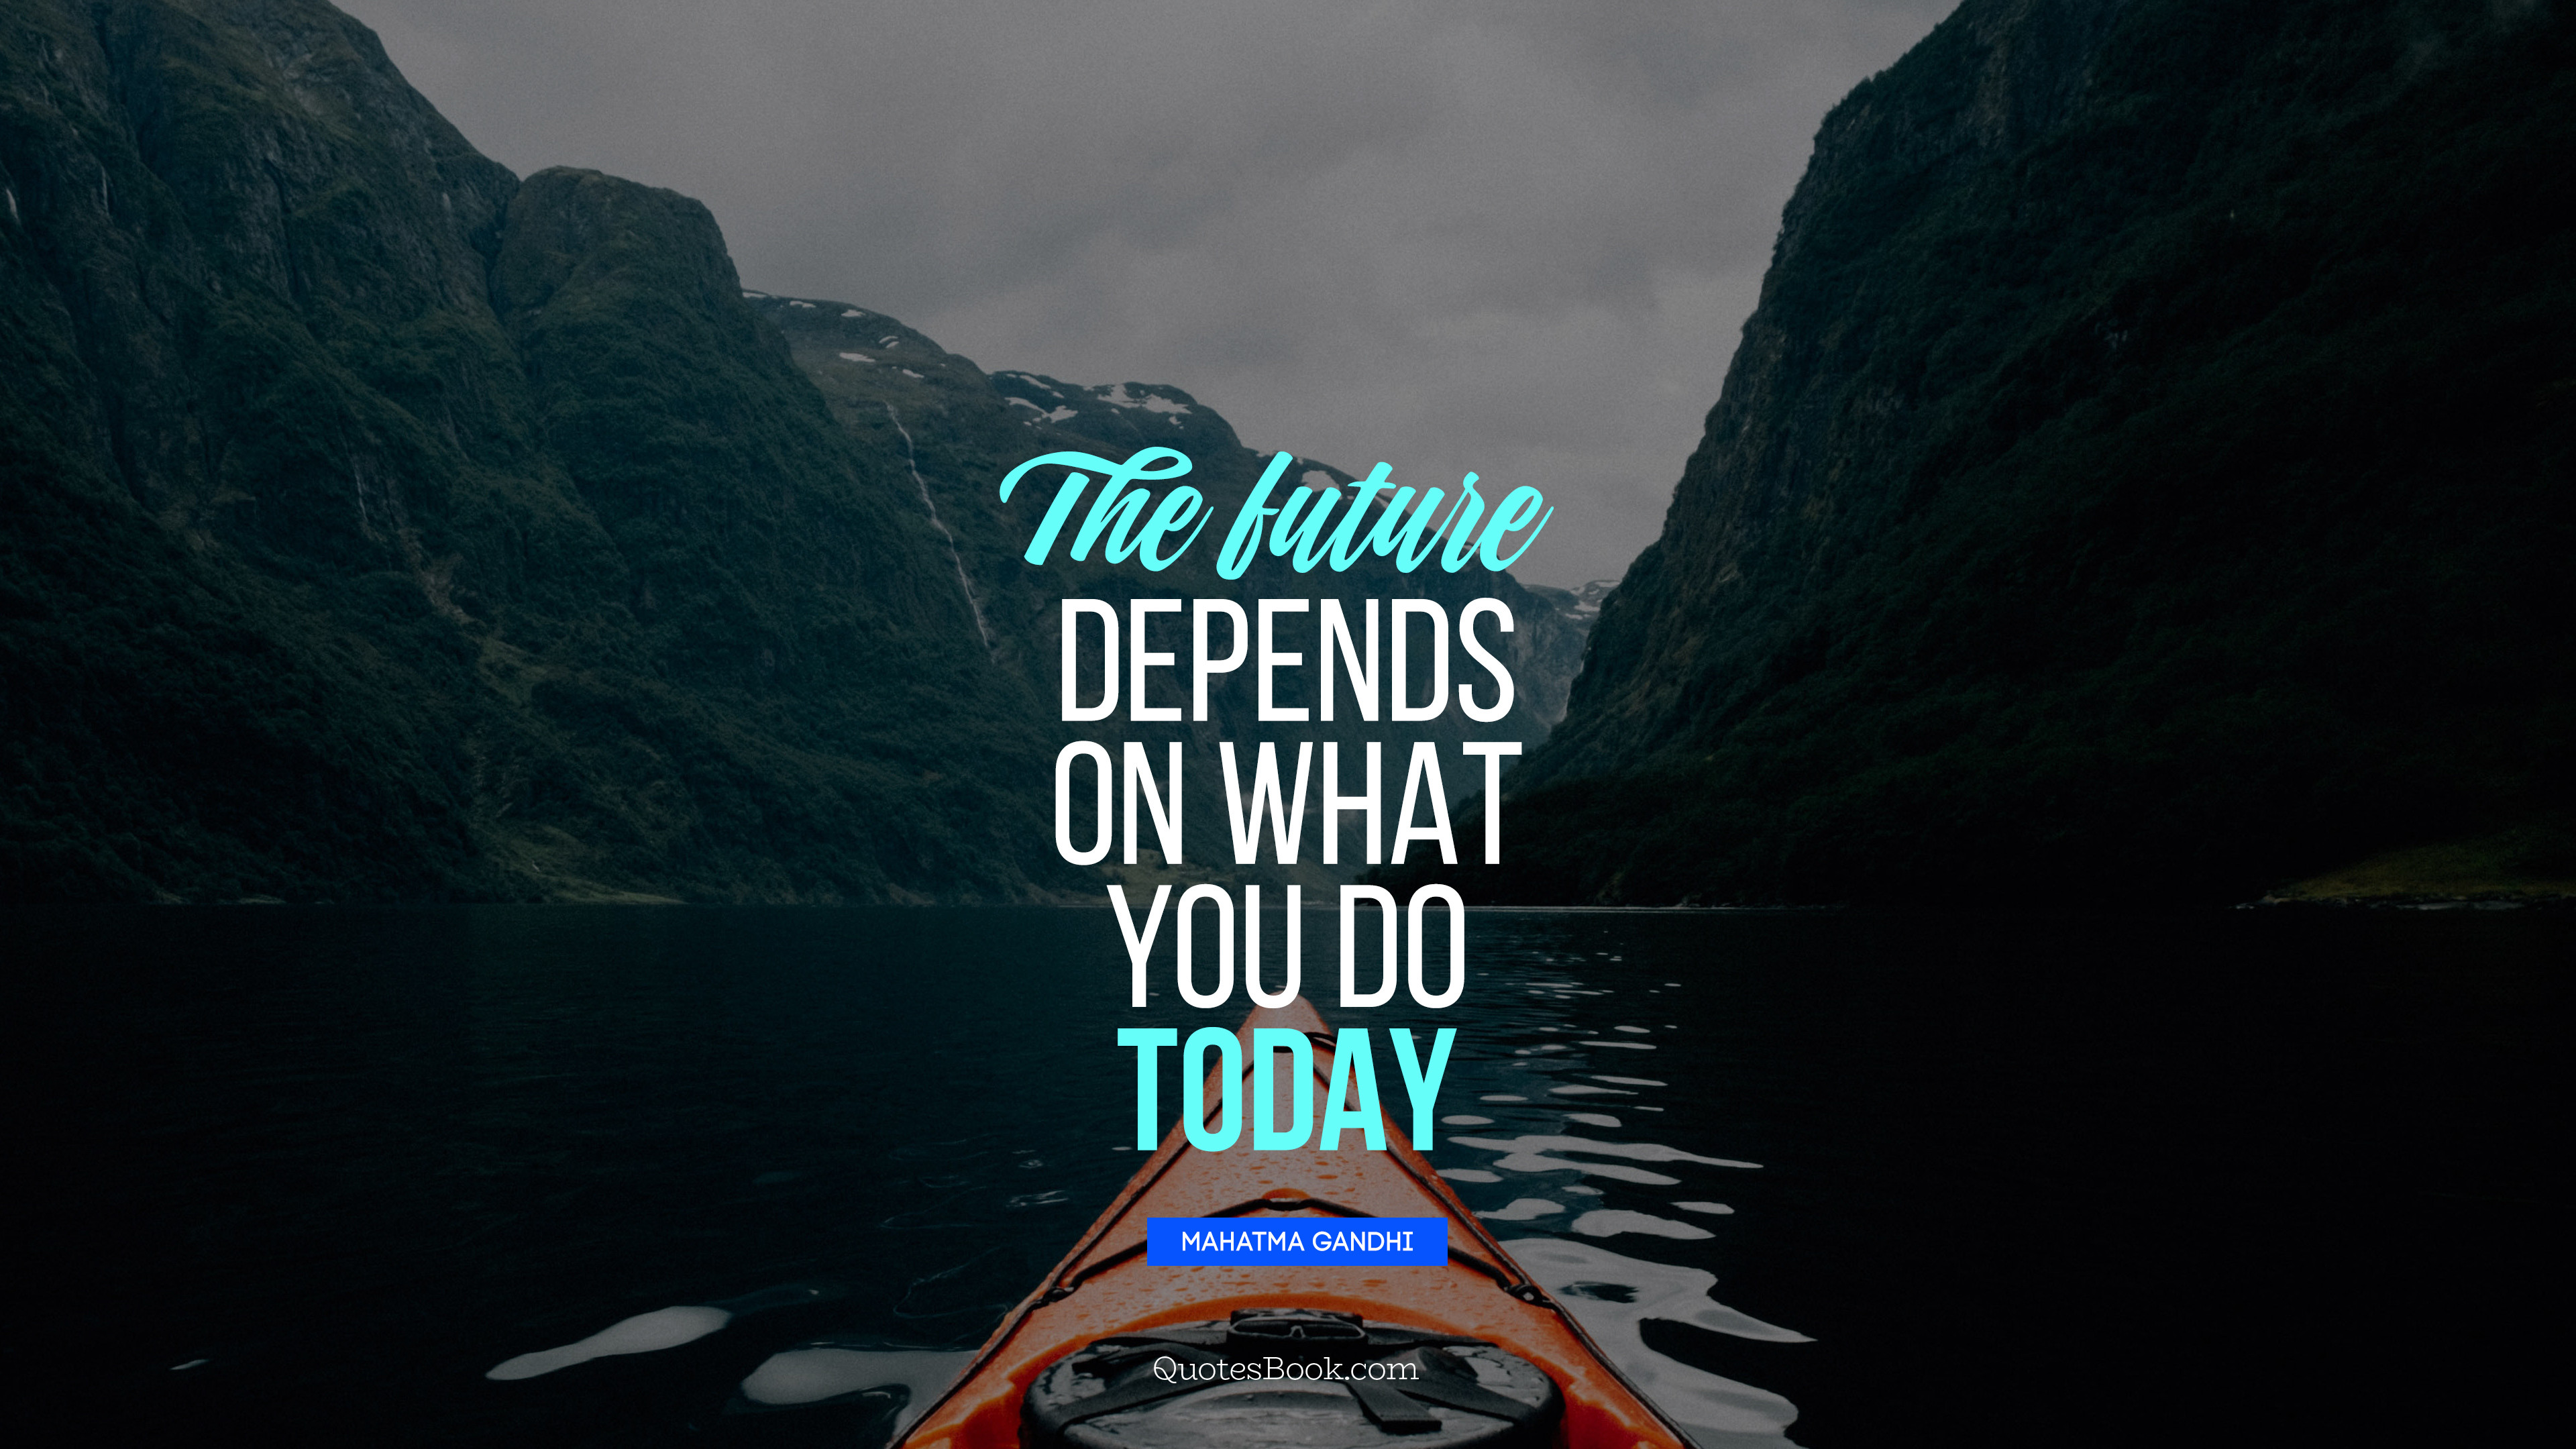 essay on future depends on what you do today